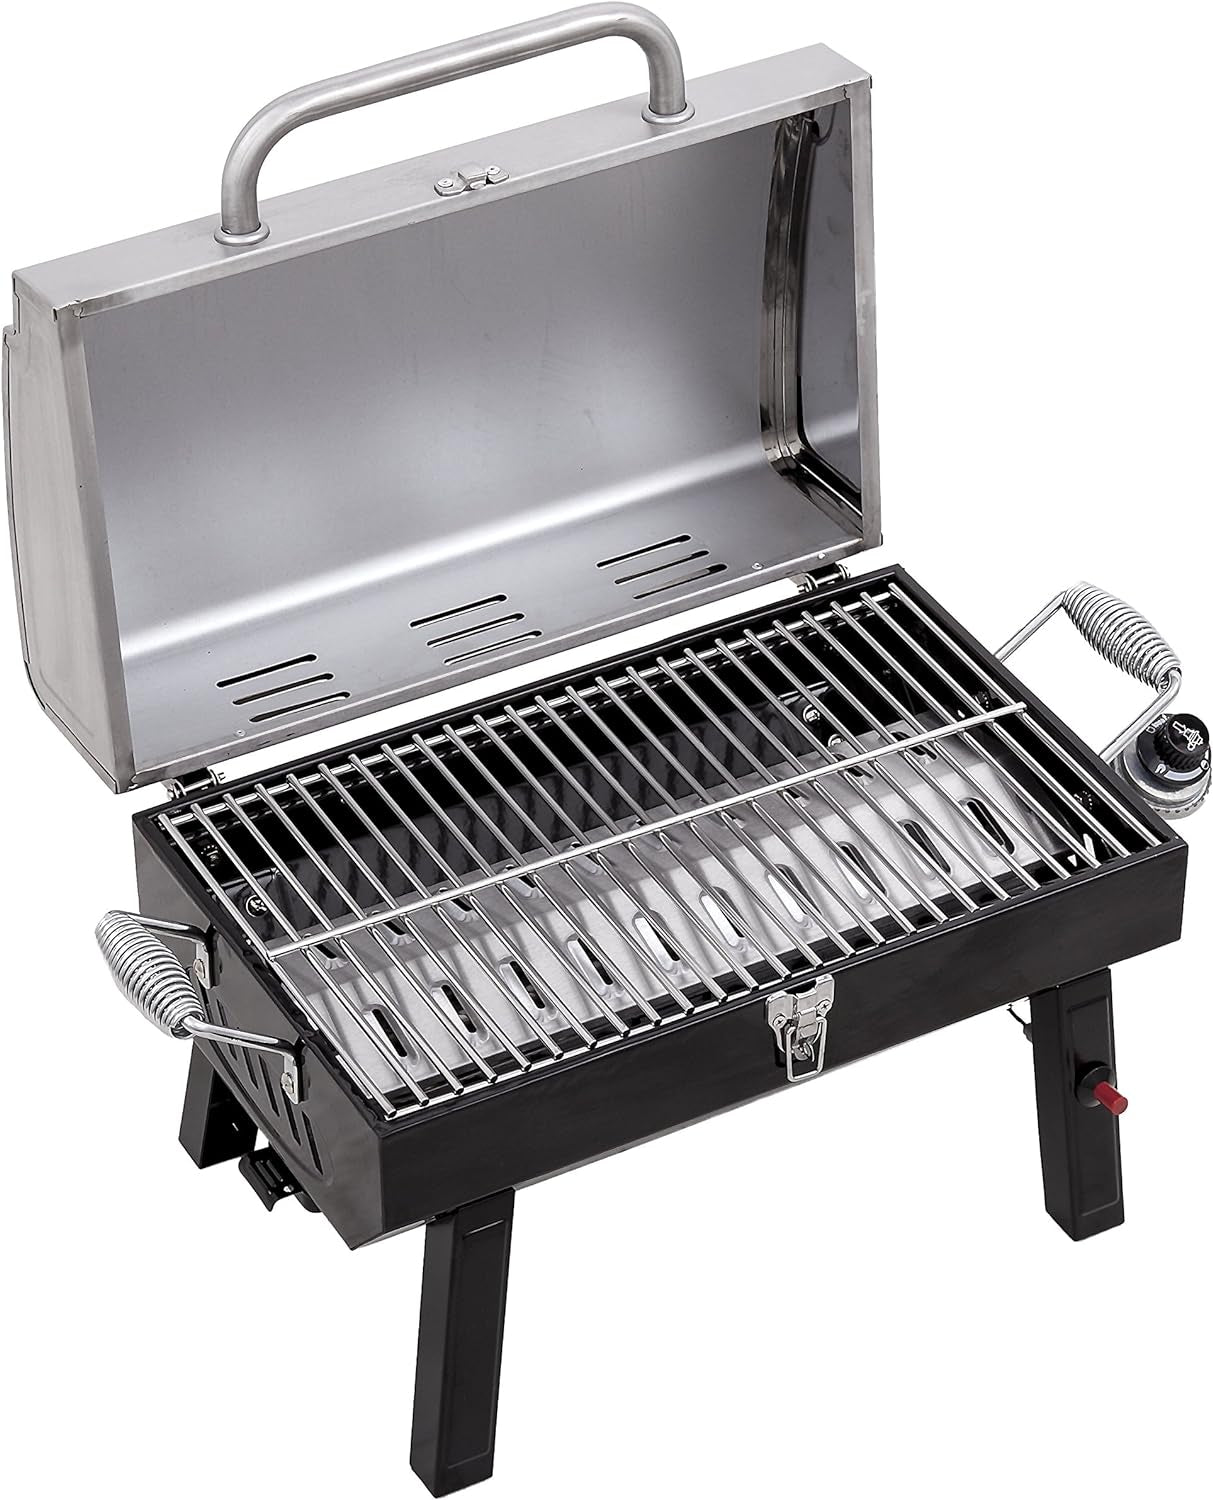 Stainless Steel Portable Liquid Propane Gas Grill